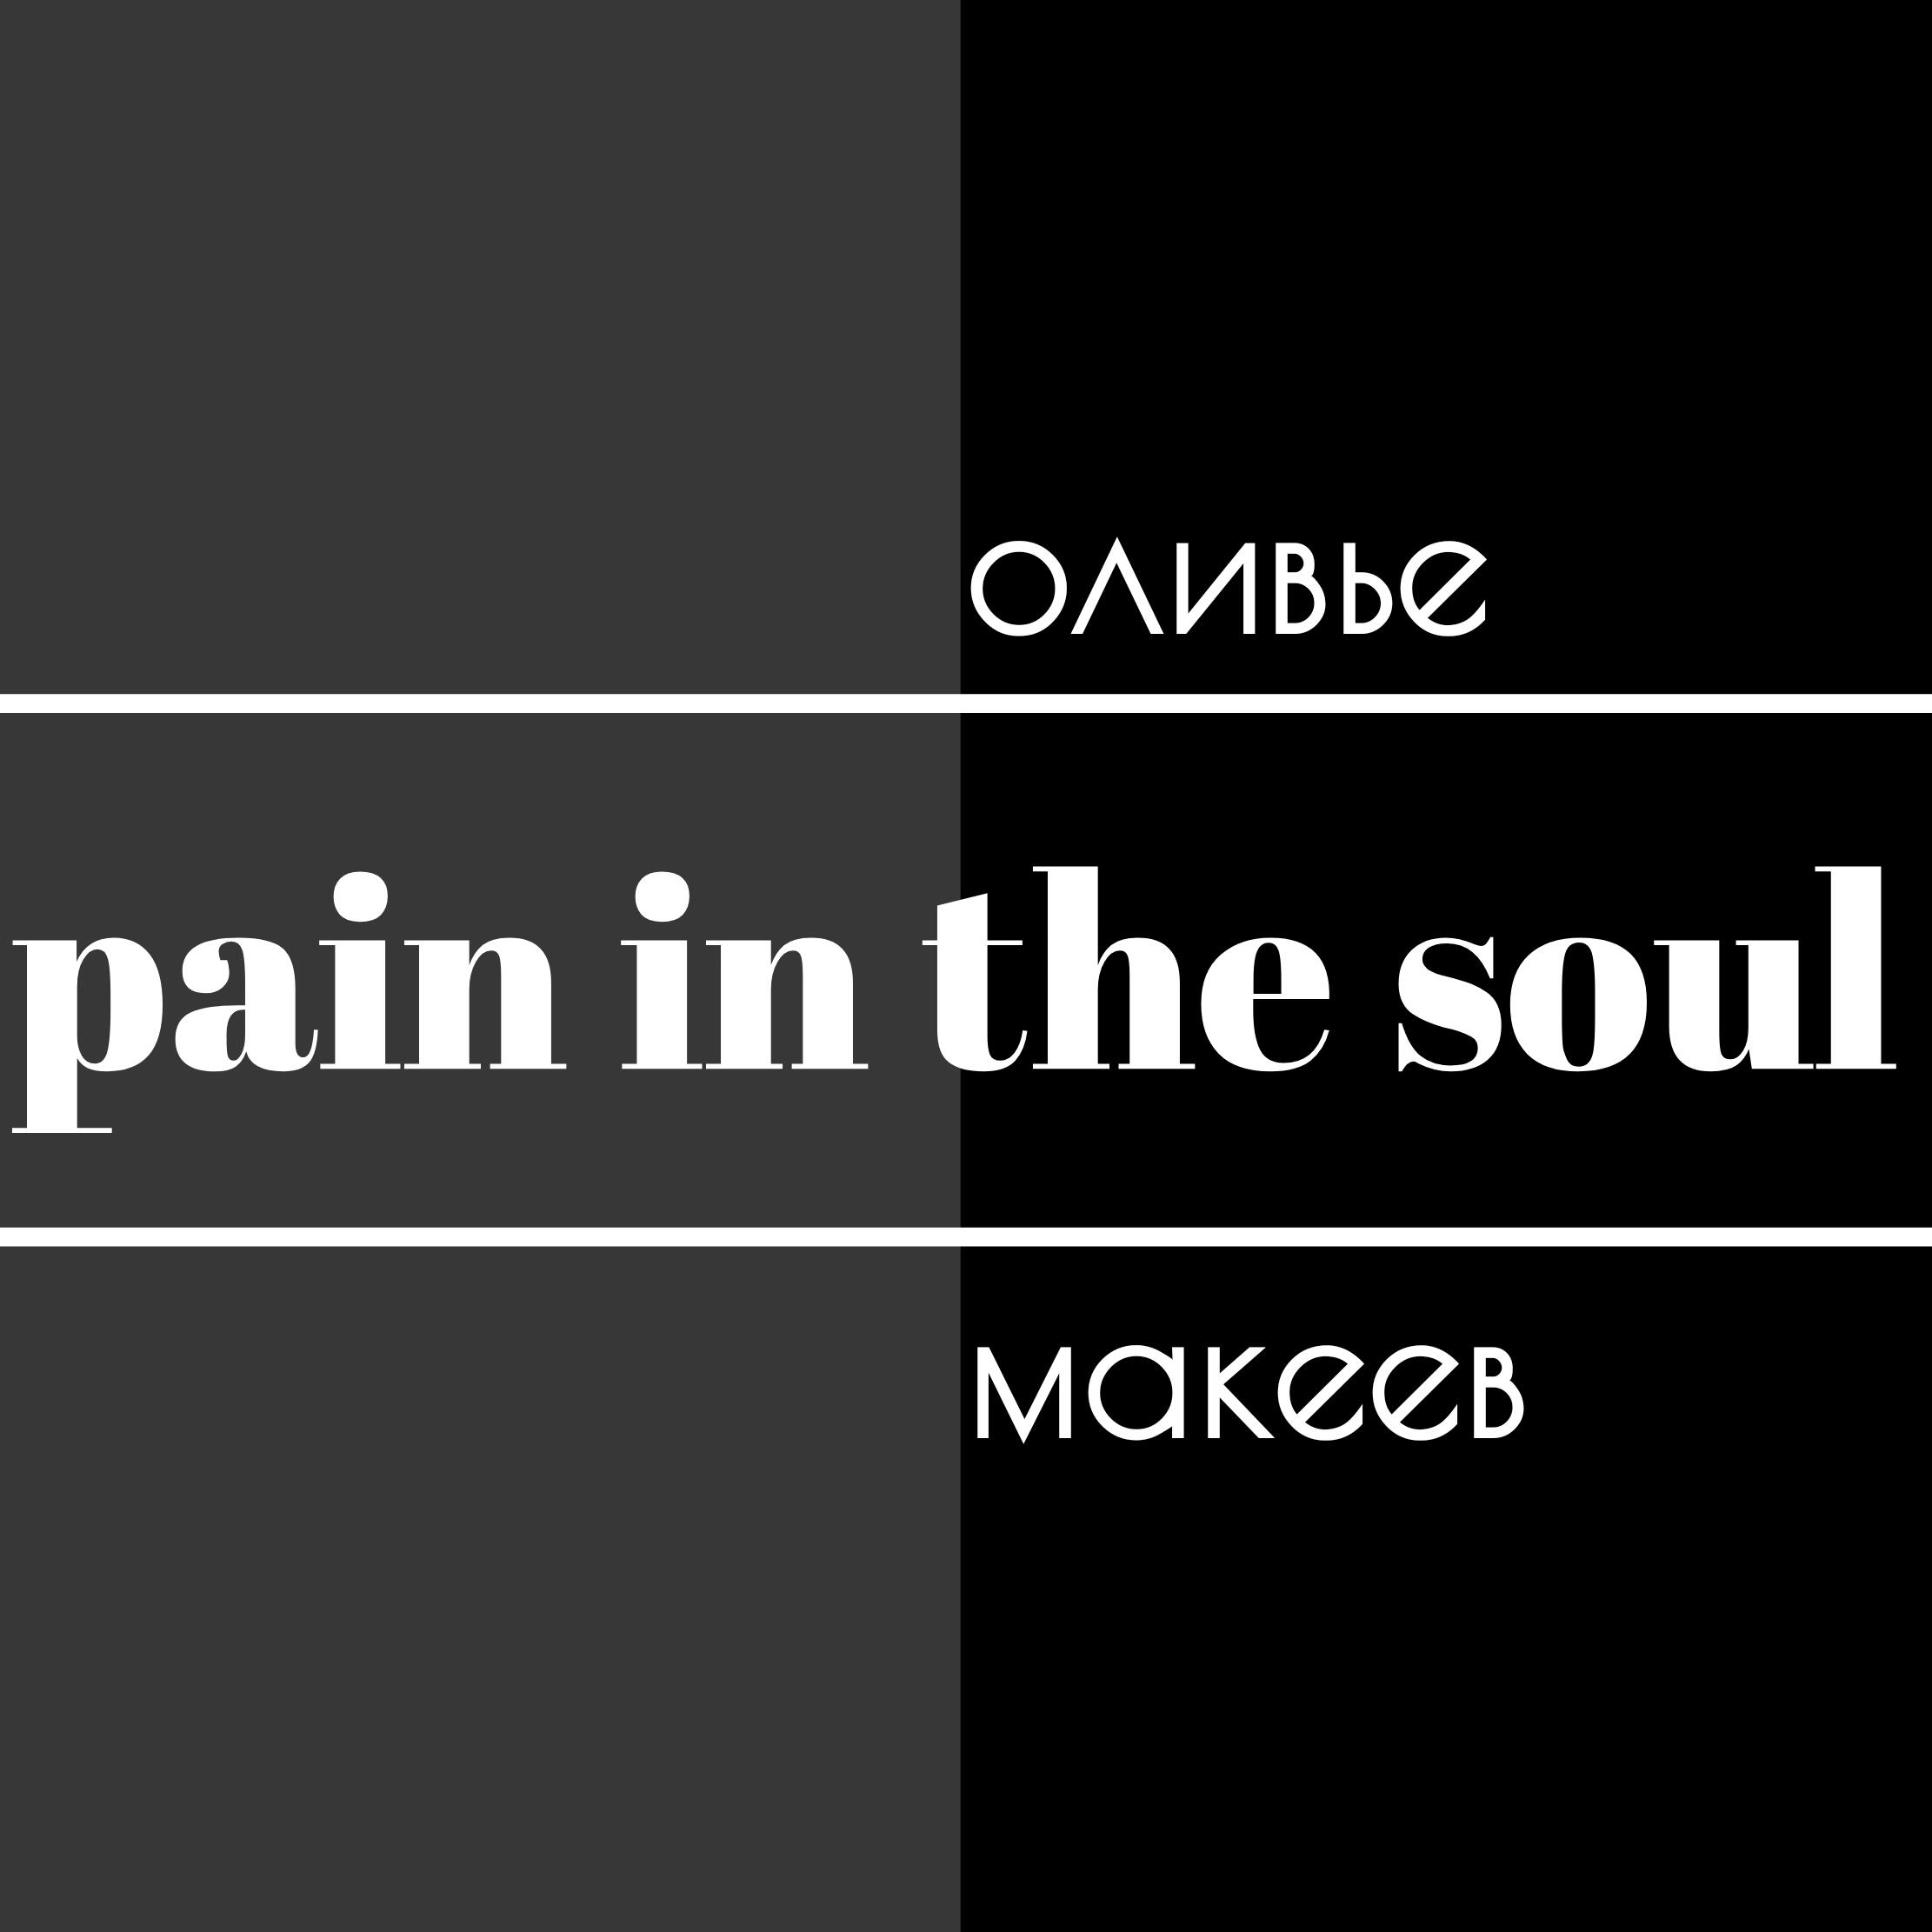 Pain in the soul